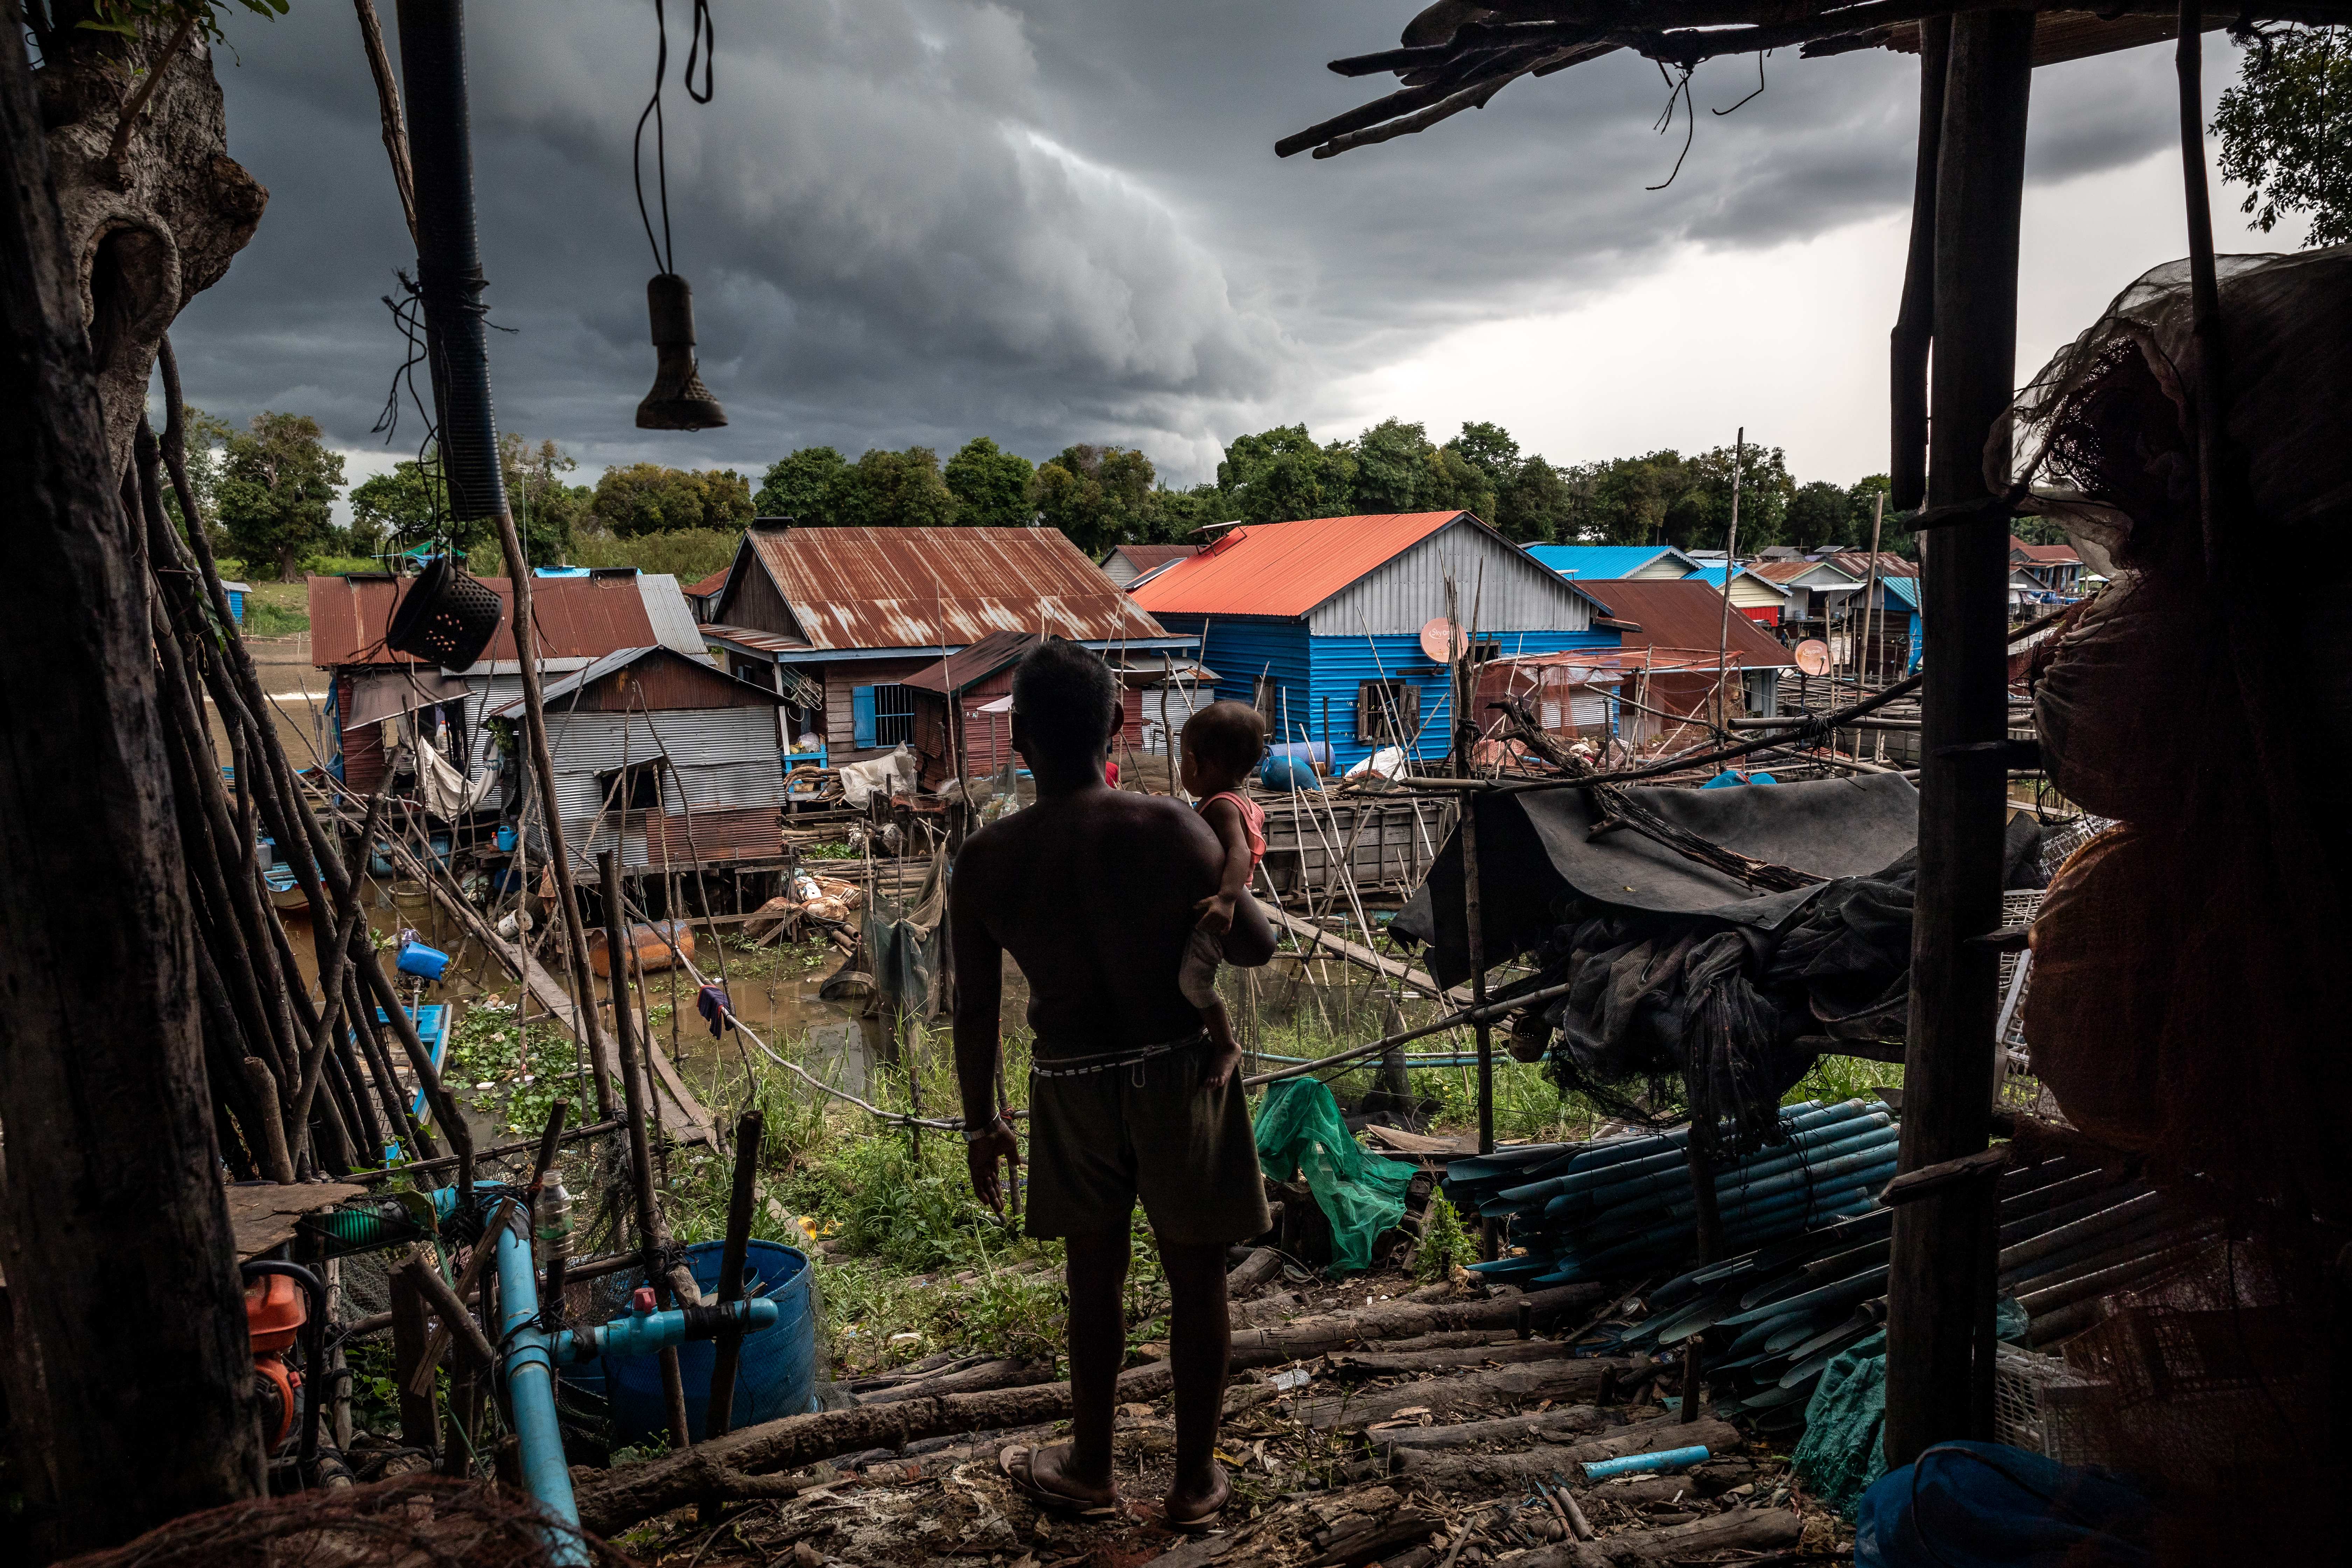 Chim Arn, 59, takes his grandson for a walk in July 2021 to watch the storm over his village in Siem Reap's Por Treay commune. 